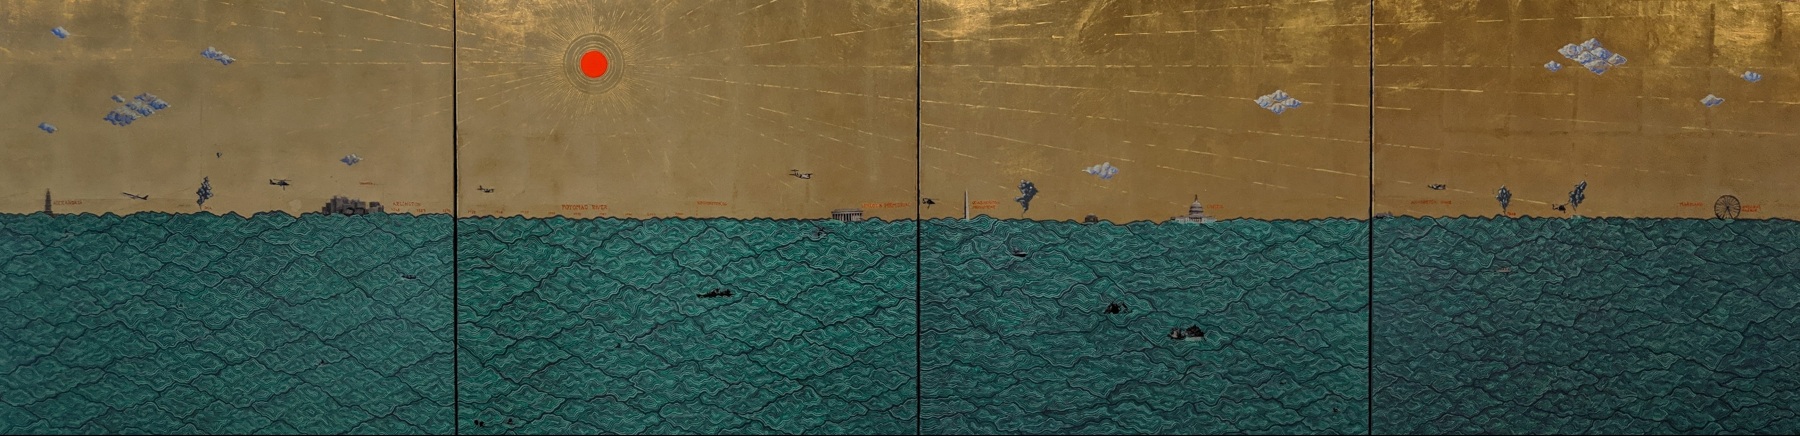 A Rising Tide Lifts All Boats - Exhibitions - Tephra ICA